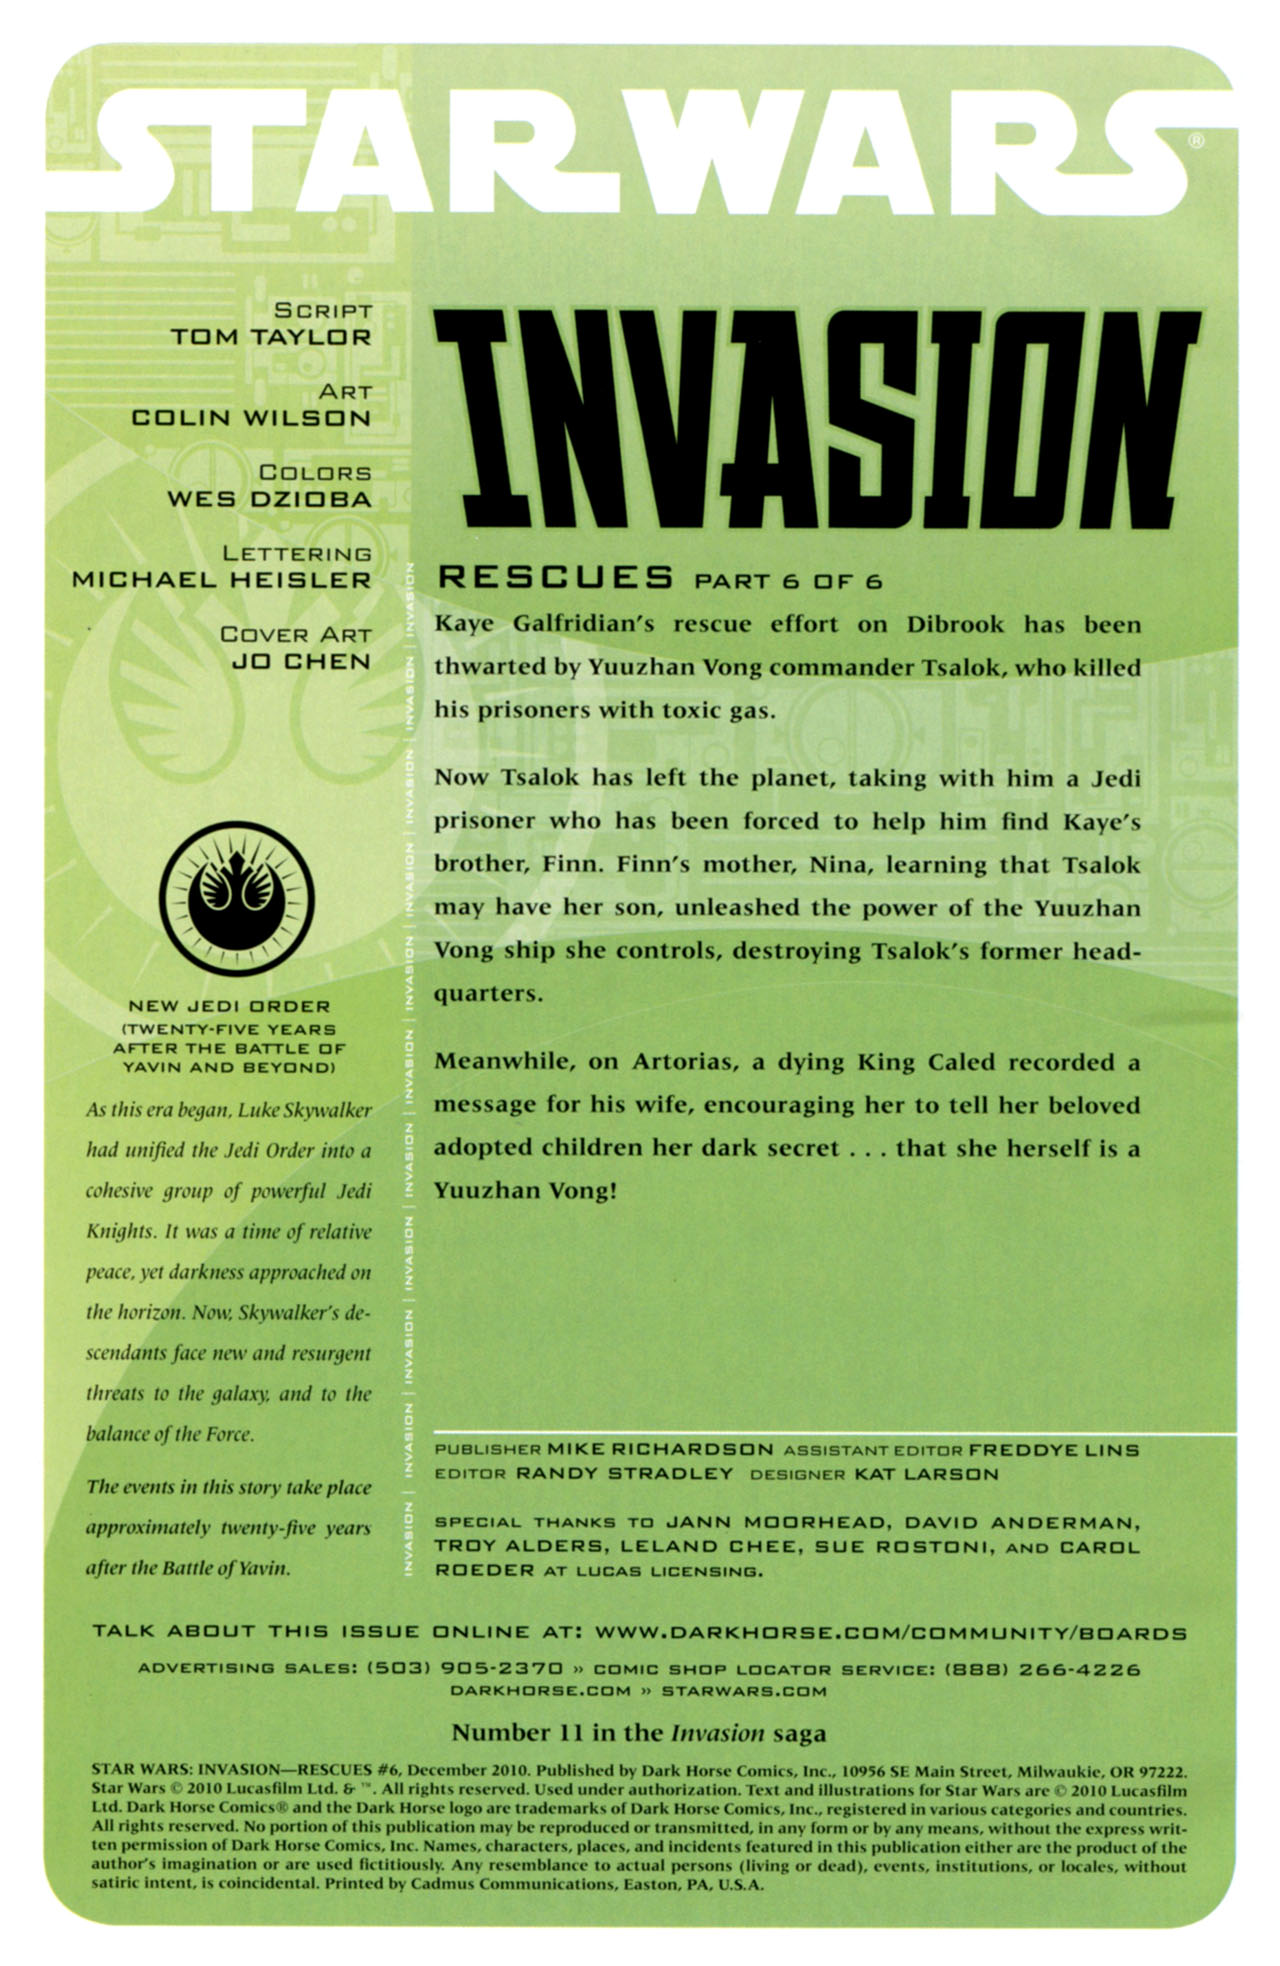 Read online Star Wars: Invasion - Rescues comic -  Issue #6 - 2